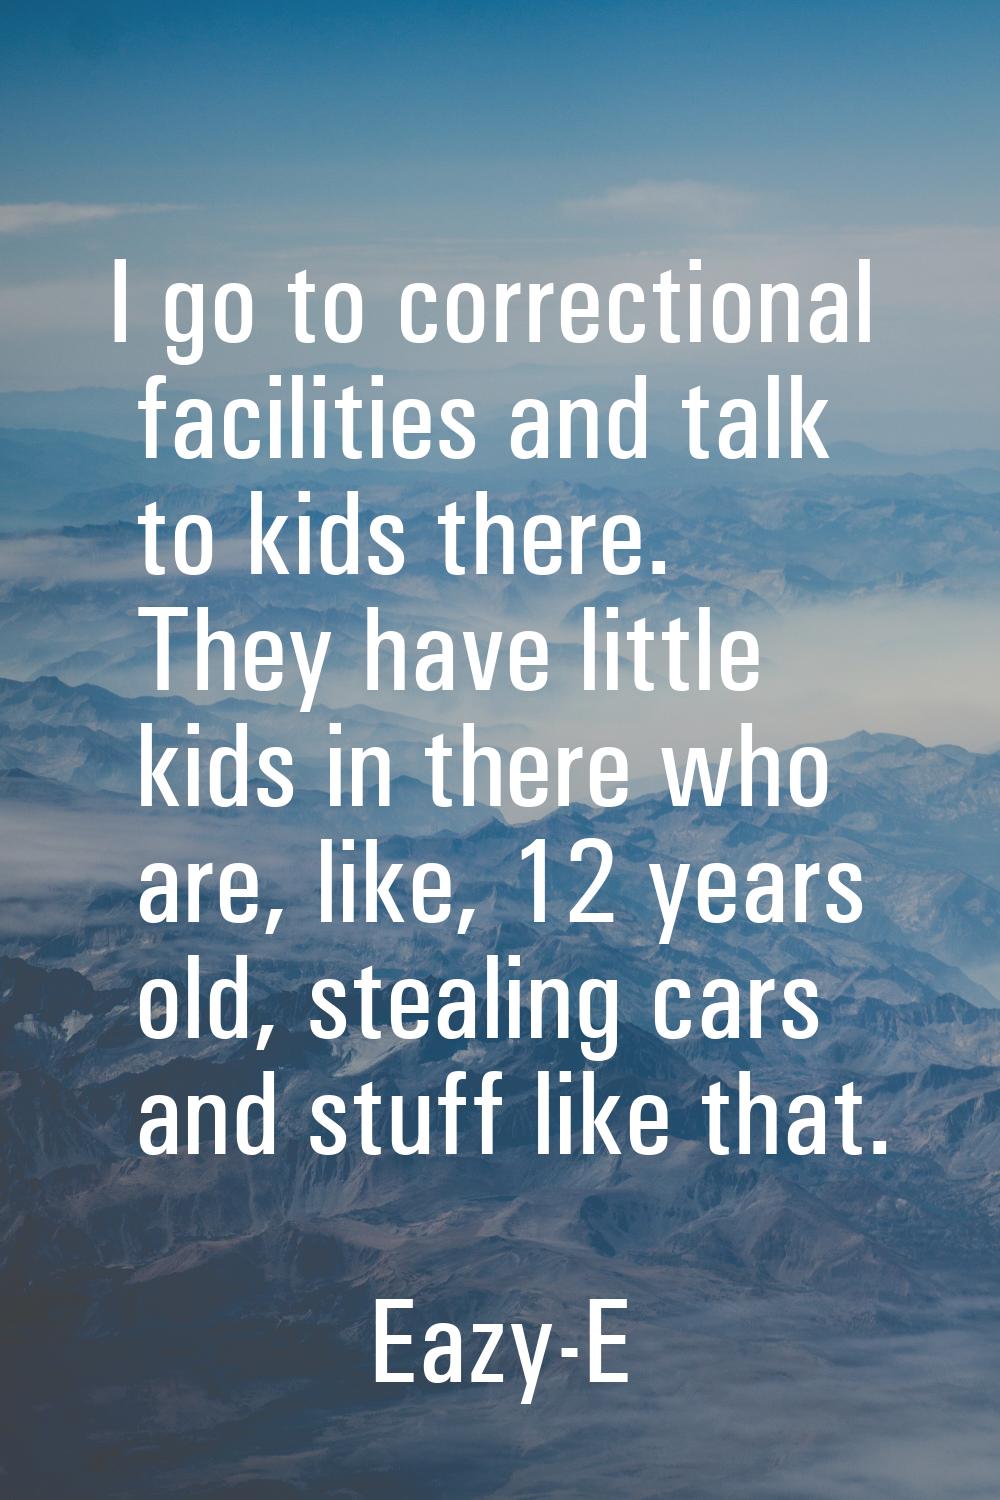 I go to correctional facilities and talk to kids there. They have little kids in there who are, lik